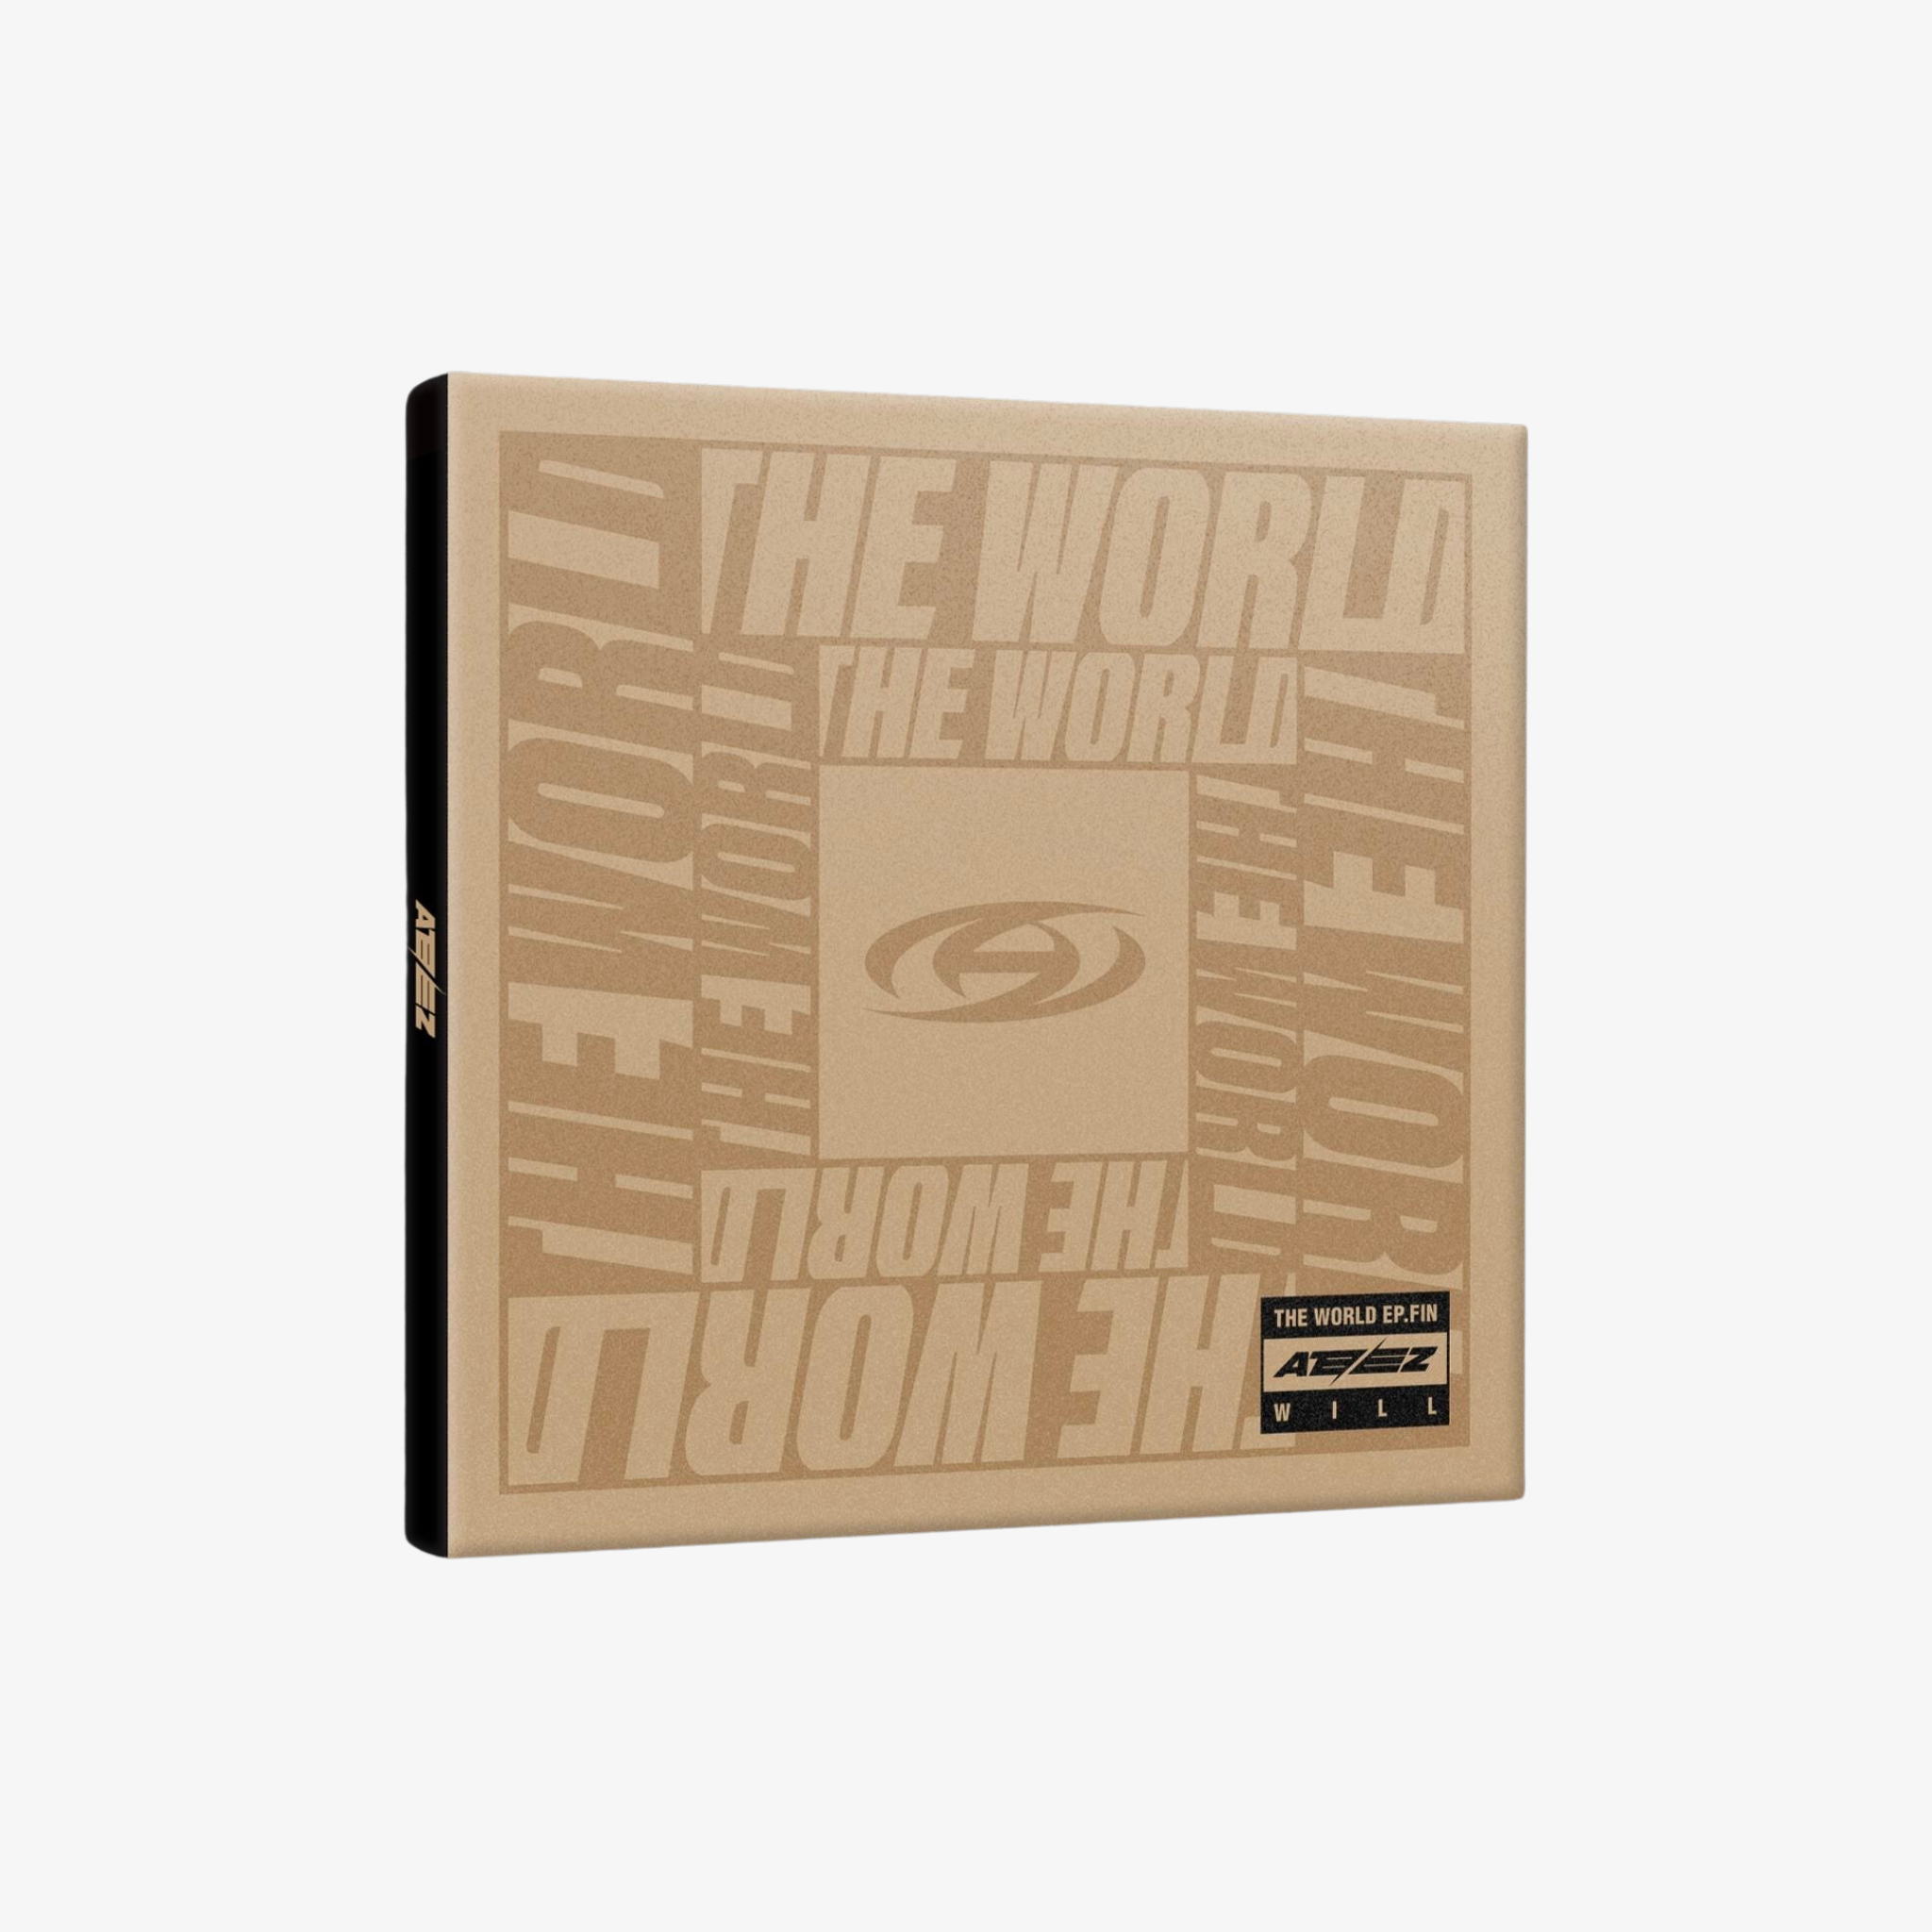 ATEEZ "The WORLD EP.FIN: WILL" (Digipack Ver.)